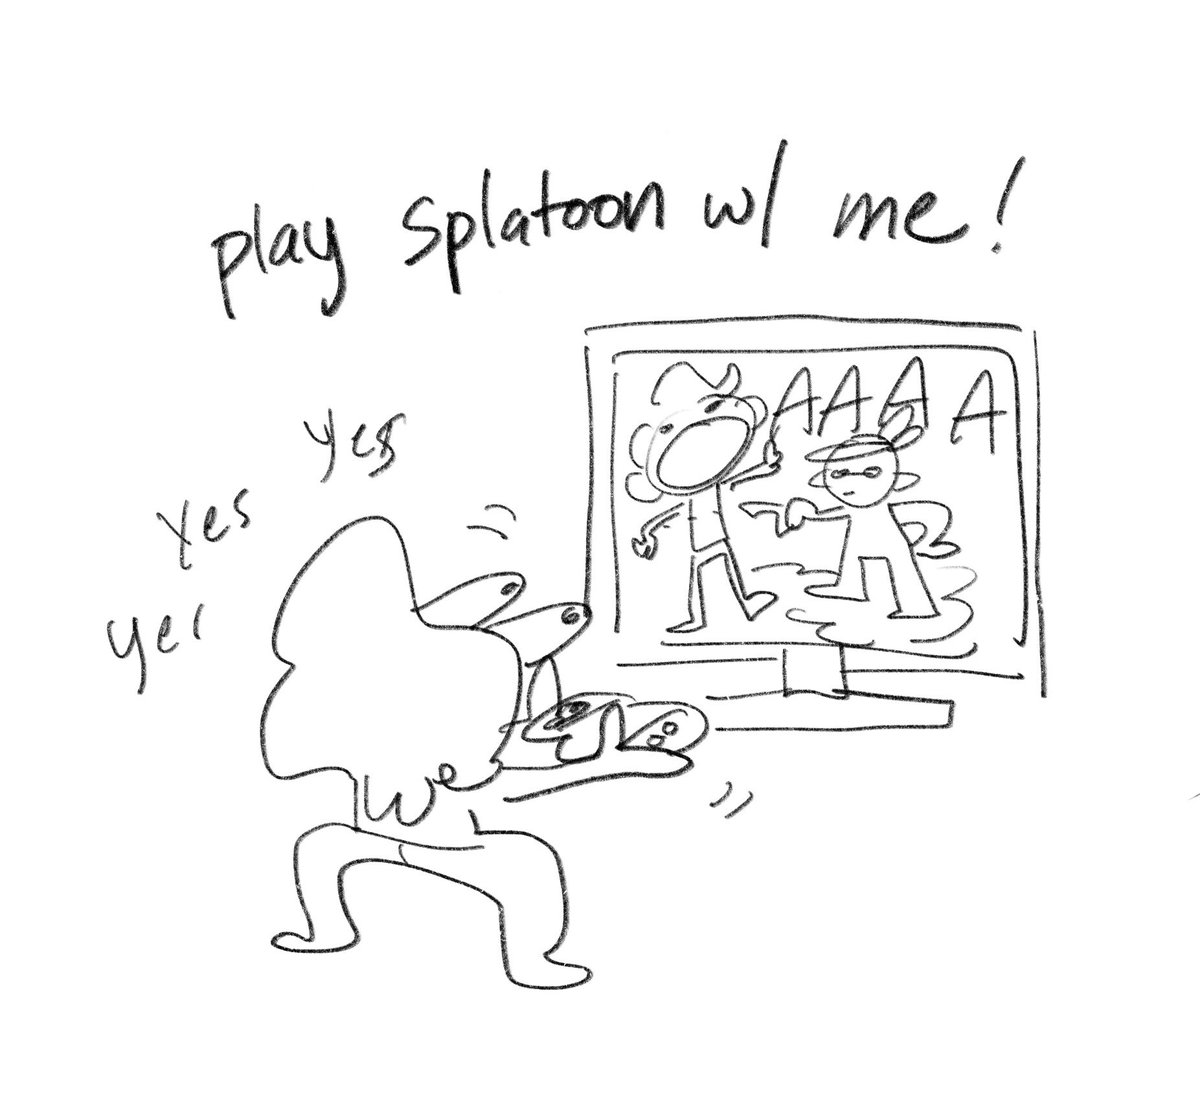 its splatoon fridaey!! i will be turfin for an hour or so, feel free to join if u have me added!! 